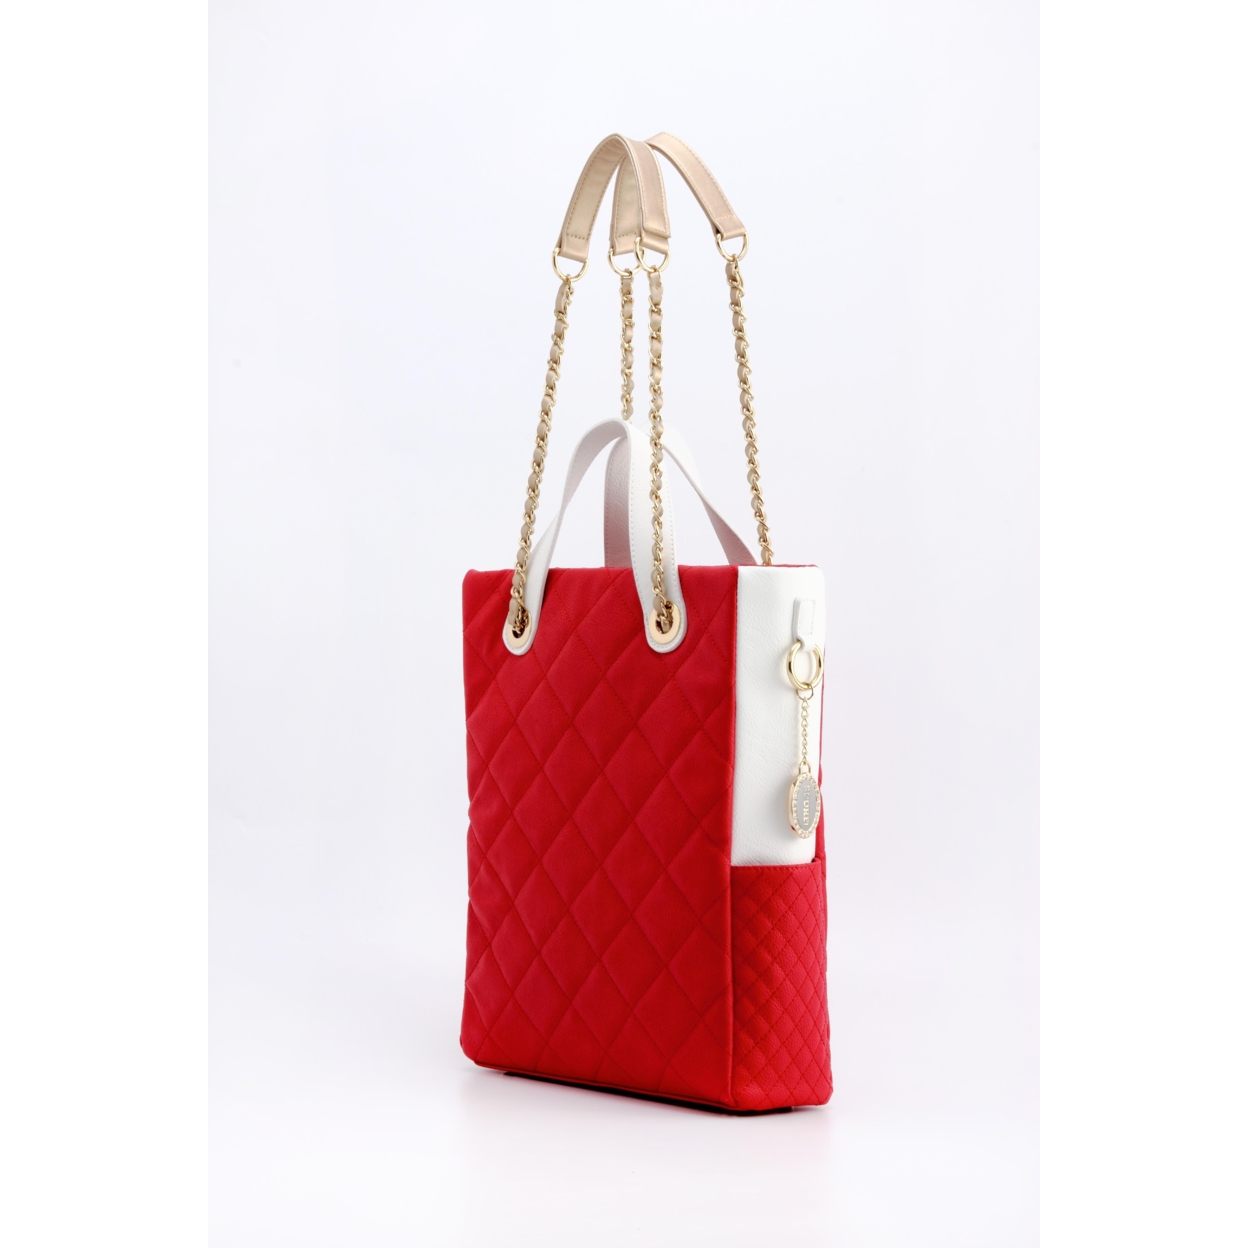 SCORE!'s Kat Travel Tote For Business, Work, Or School Quilted Shoulder Bag- Red, White And Gold